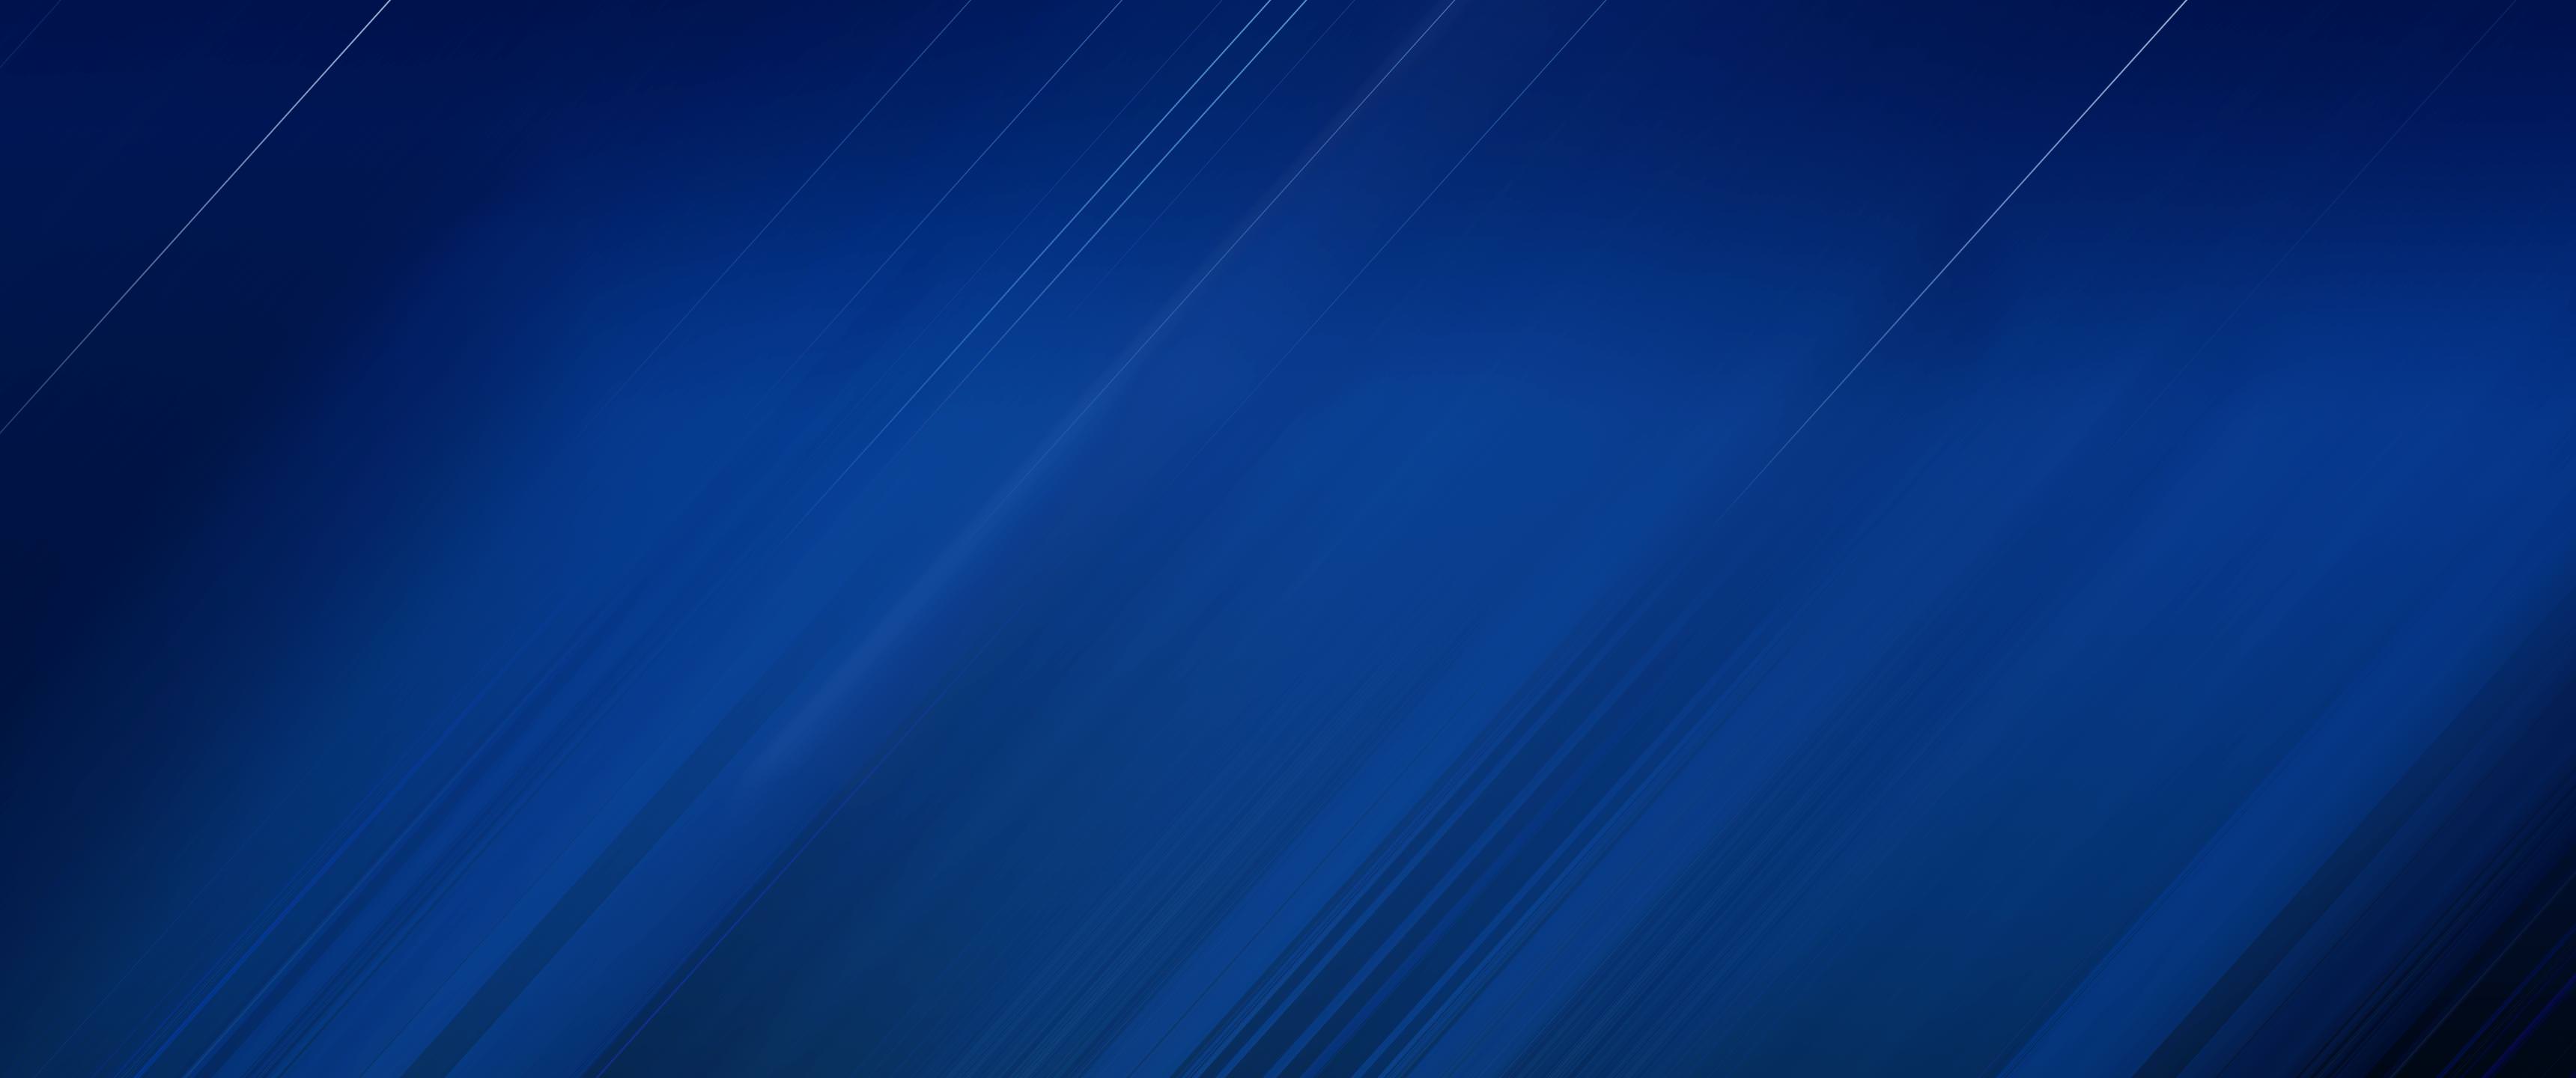 Abstract Diagonal Lines Minimalism Lines Blue 3440x1440